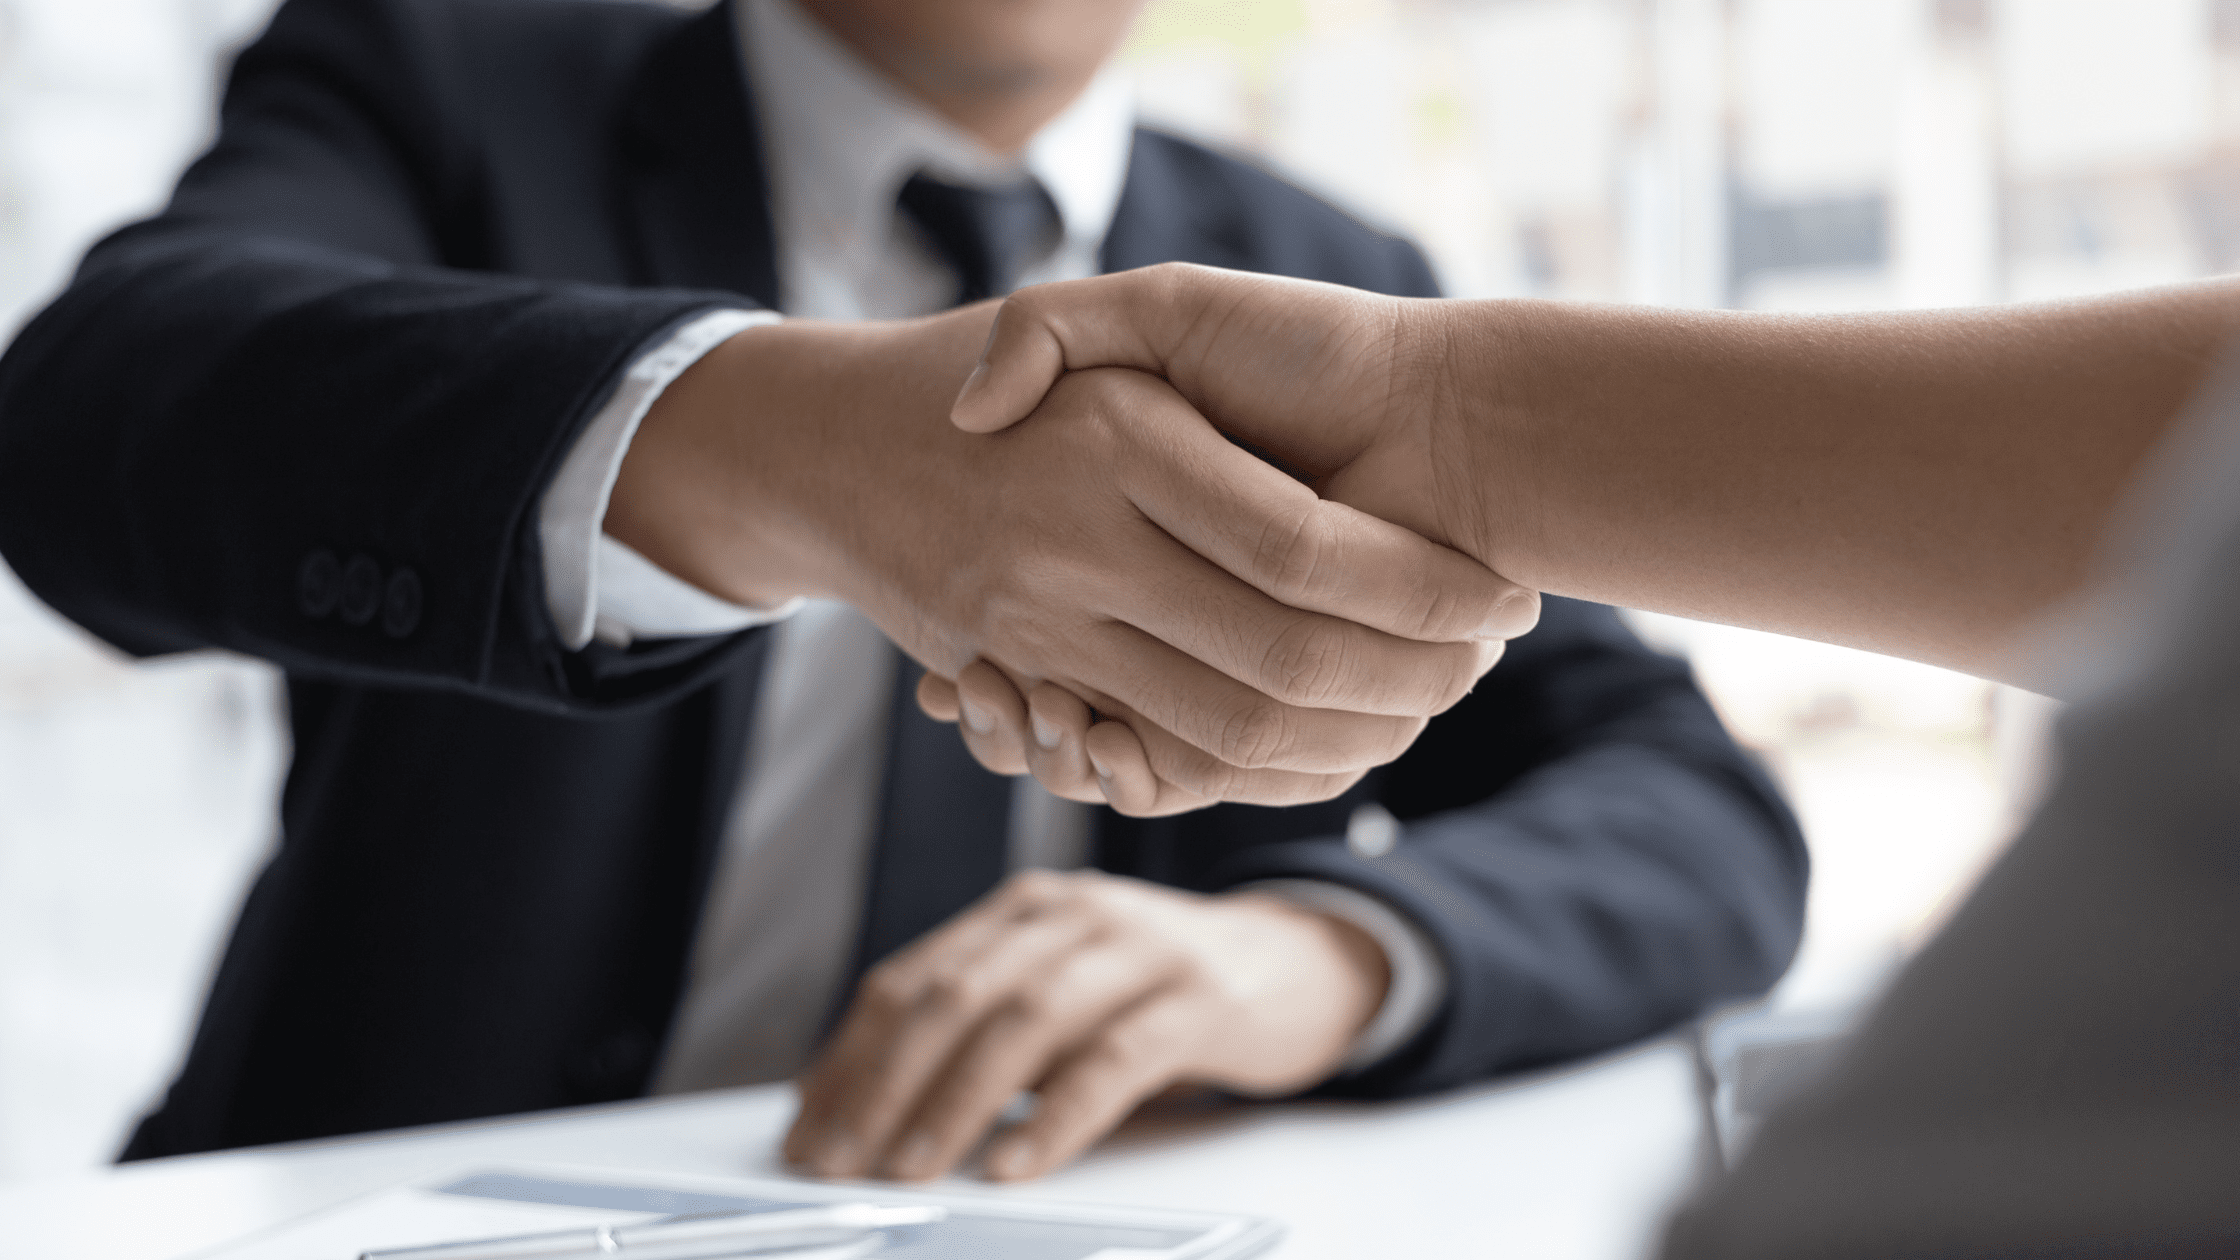 Two people shaking hands over desk for Medical School Interview.